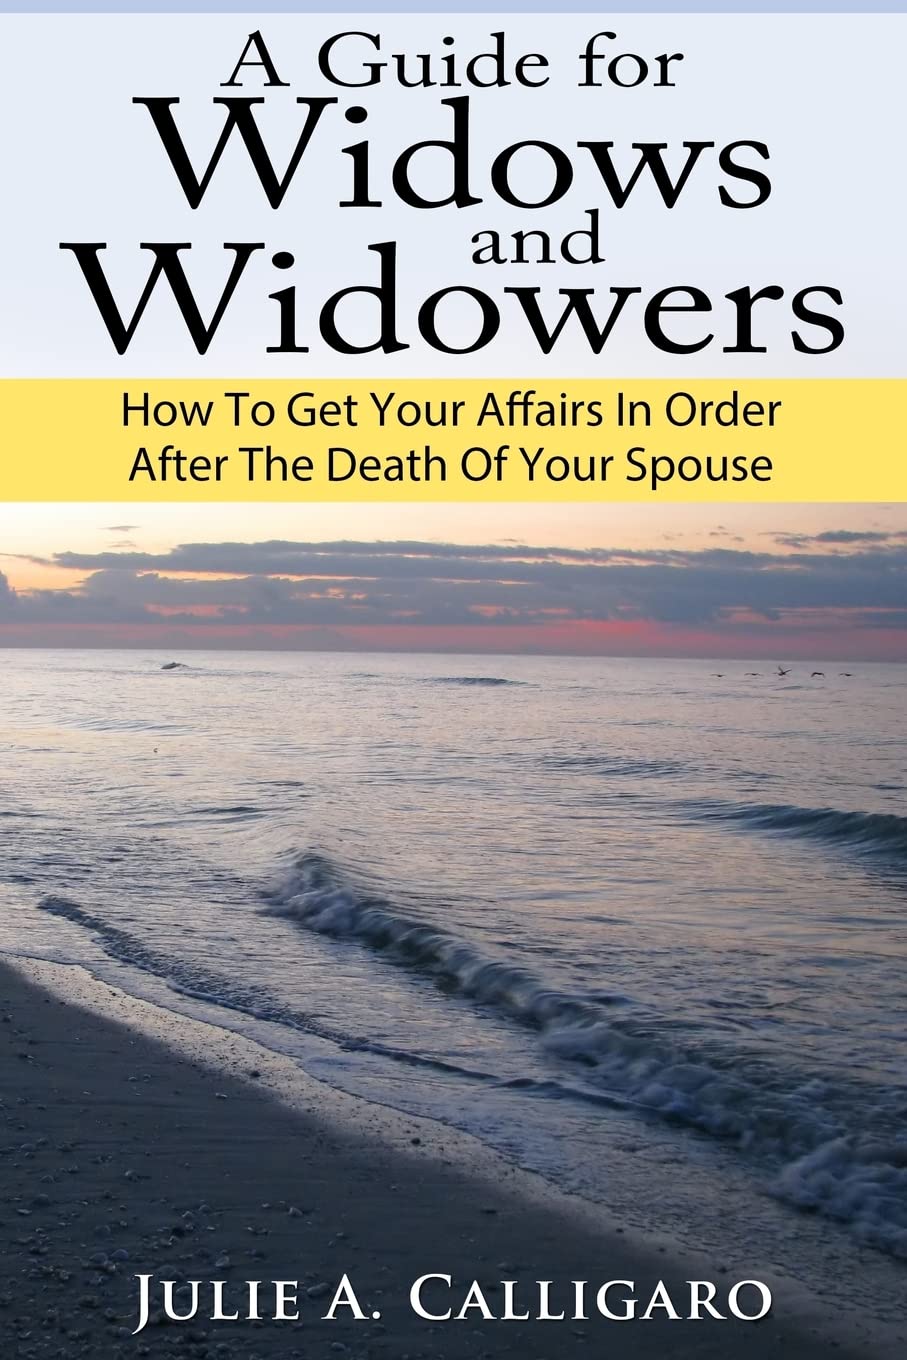 A Guide For Widows And Widowers: How to Get Your Affairs in Order After the Death of Your Spouse